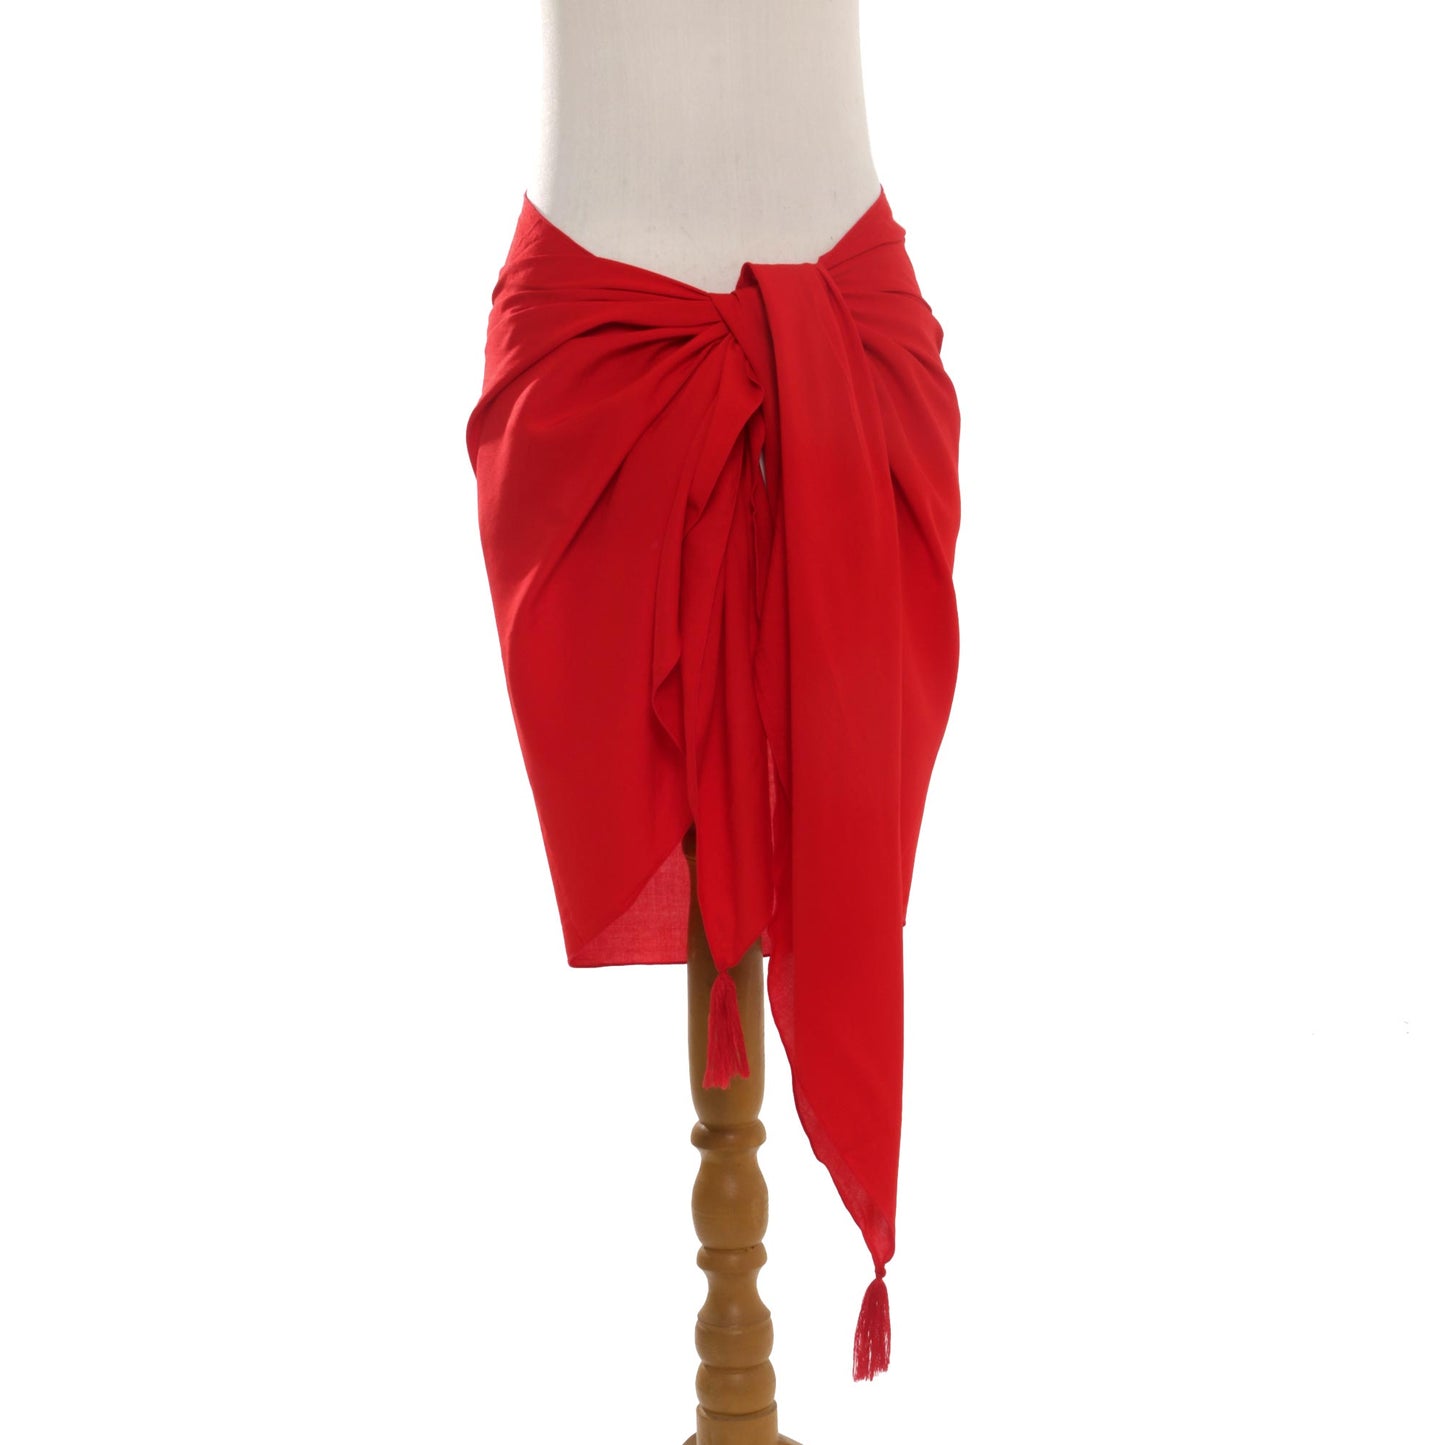 Paradise Breeze in Red Handmade Red 100% Rayon Sarong from Indonesia